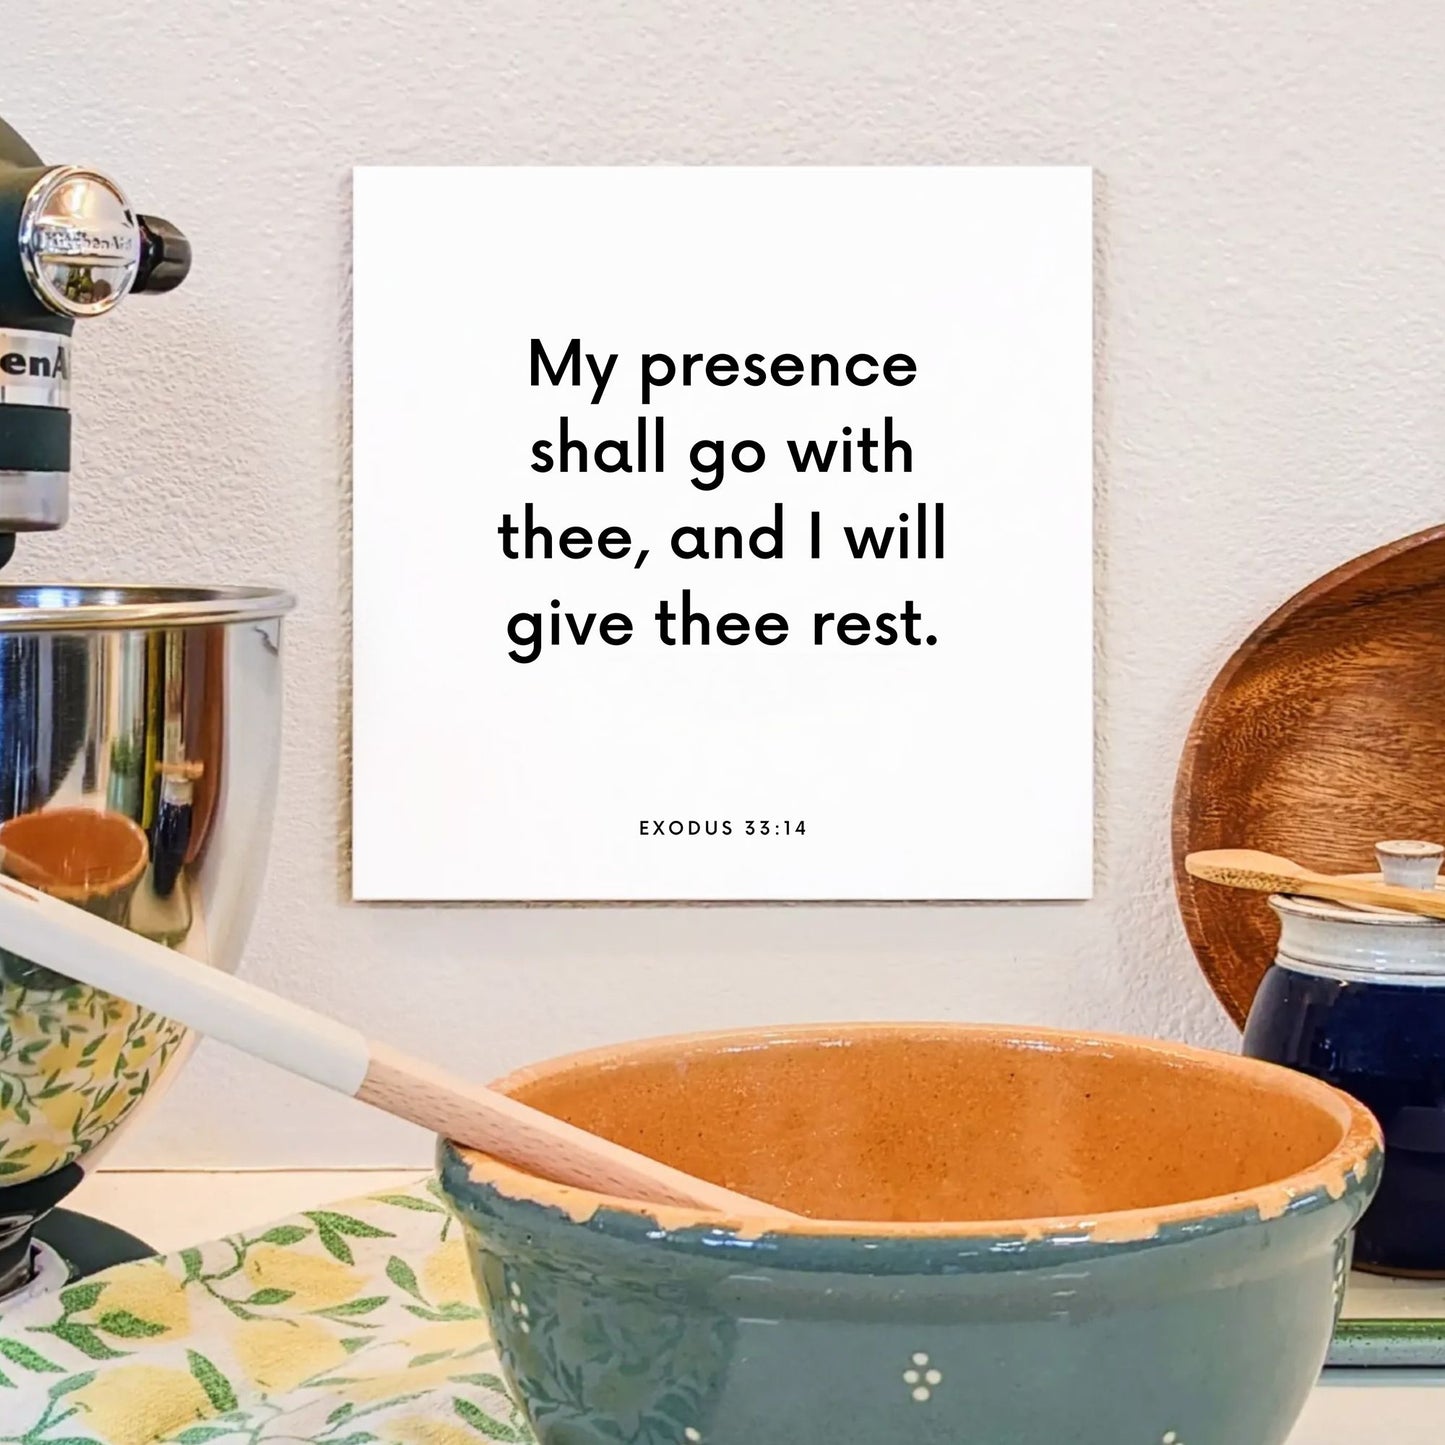 Kitchen mouting of the scripture tile for Exodus 33:14 - "My presence shall go with thee, and I will give thee rest"